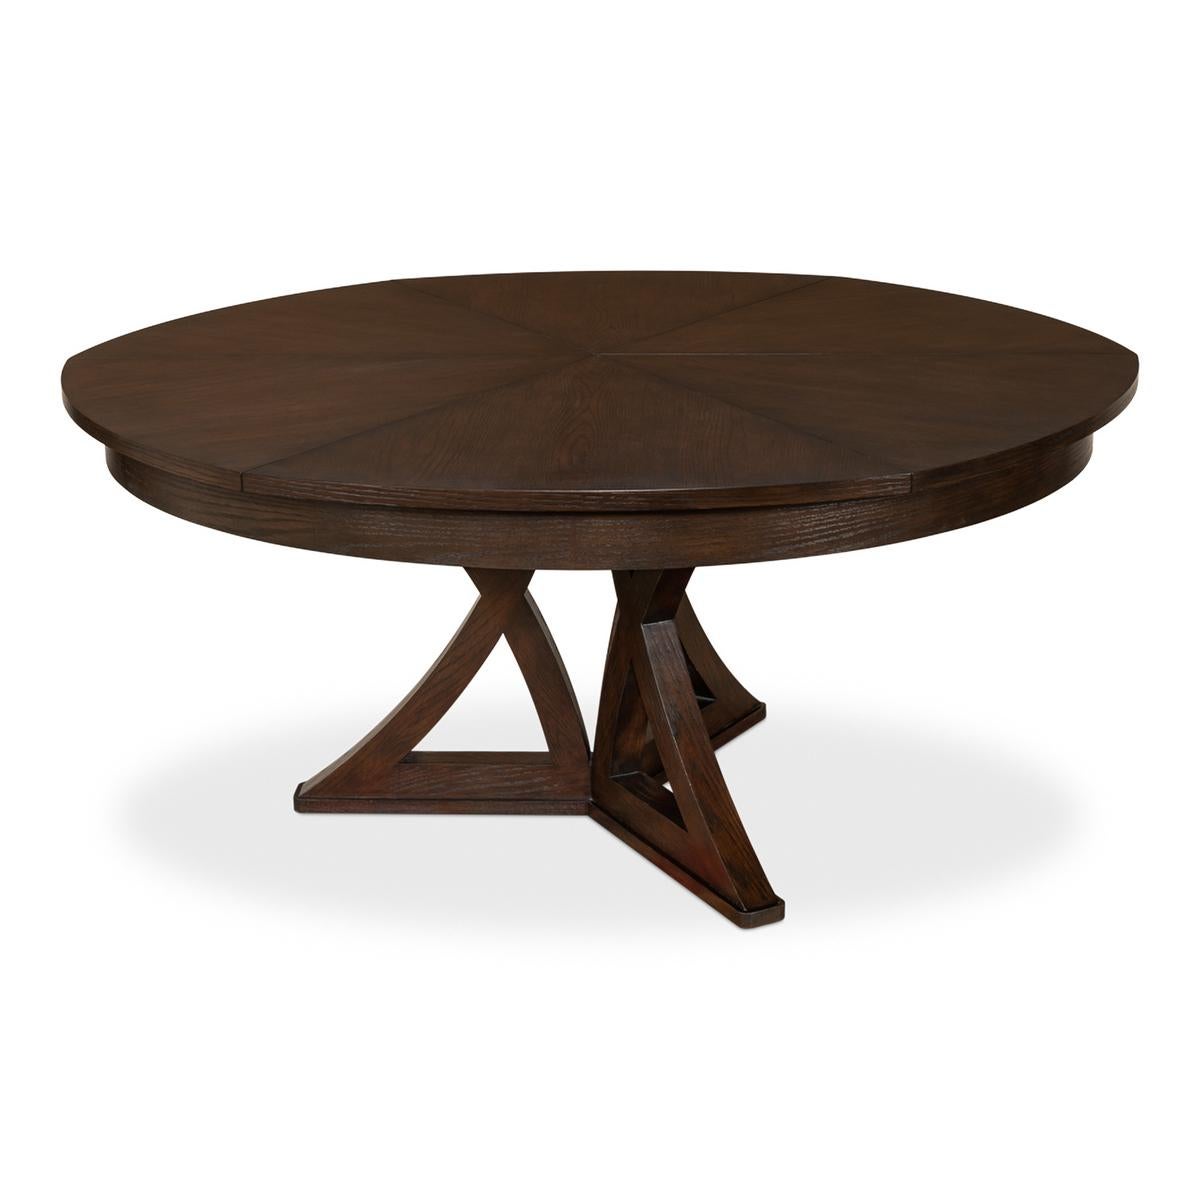 Contemporary Rustic Round Dining Table, Burnt Brown Oak For Sale